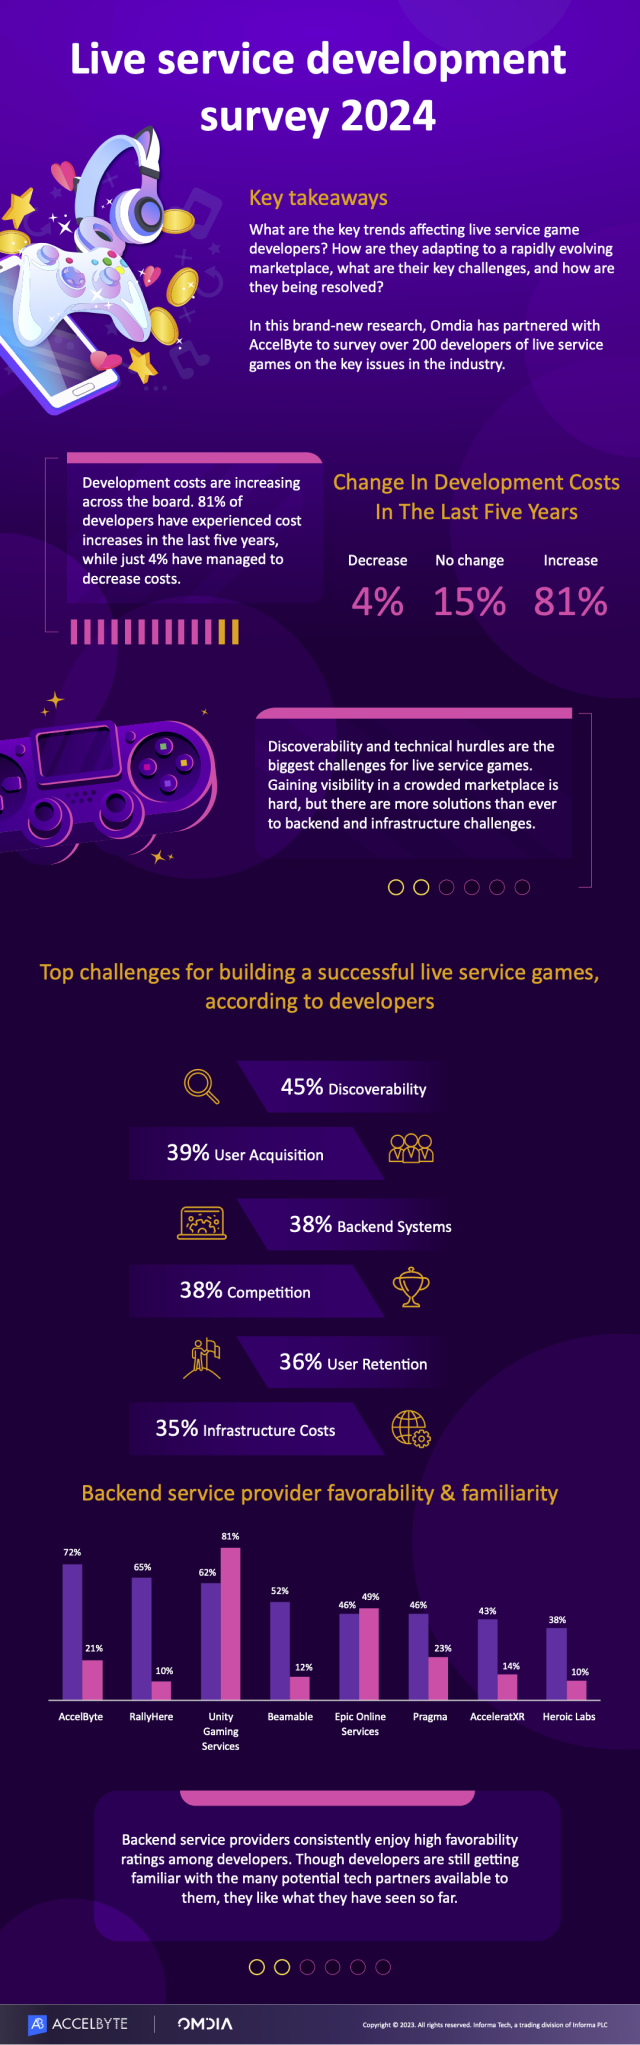 AccelByte project-infographic_V1 1